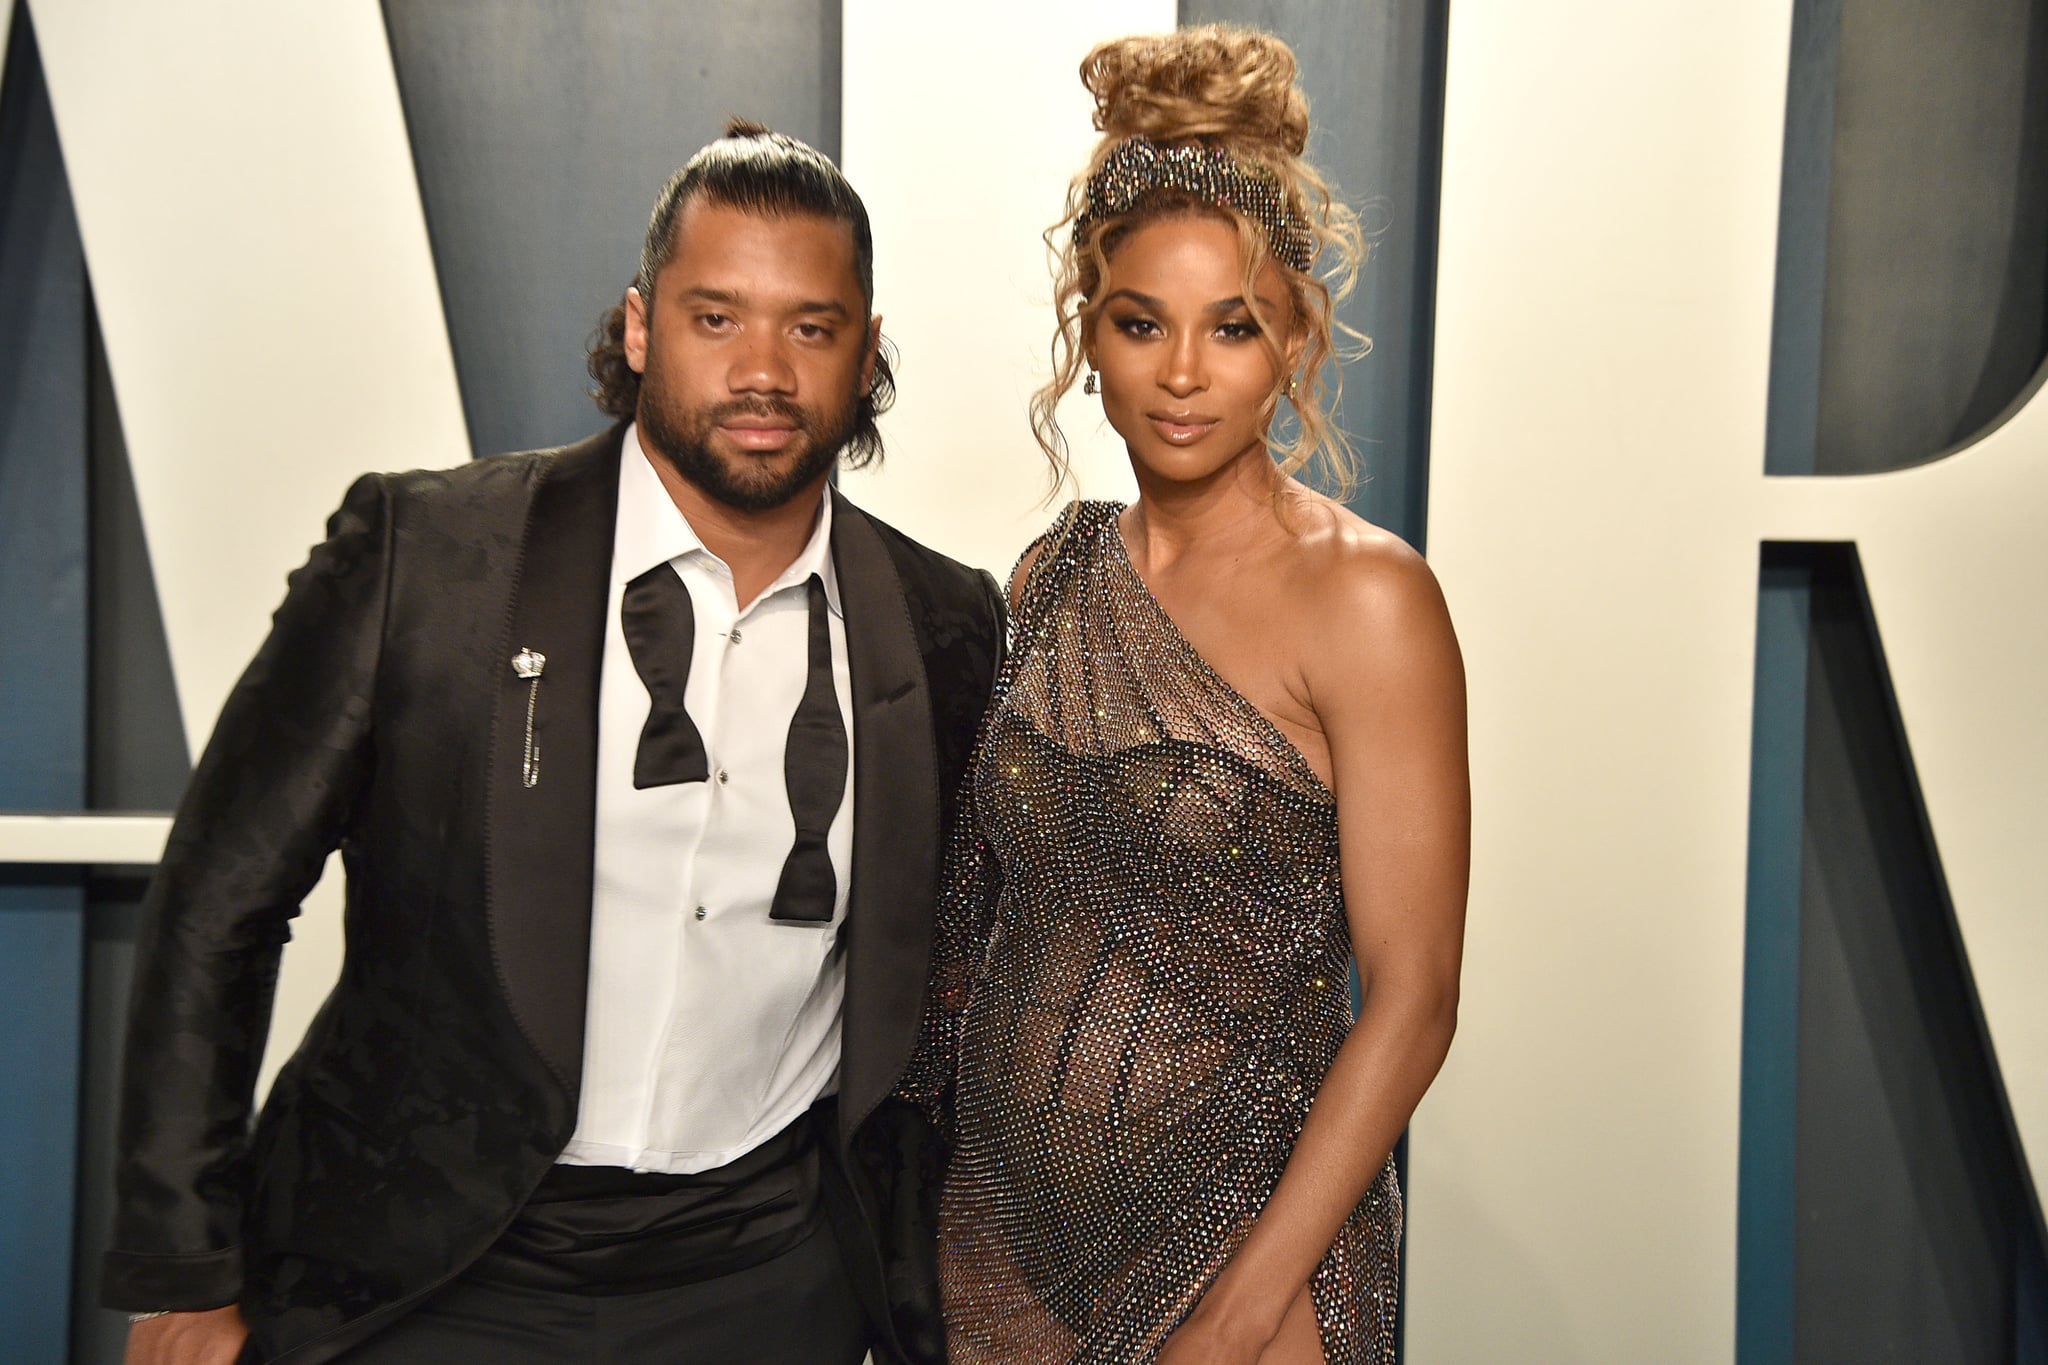 BEVERLY HILLS, CALIFORNIA - FEBRUARY 09: Russell Wilson and Ciara attend the 2020 Vanity Fair Oscar Party at Wallis Annenberg Center for the Performing Arts on February 09, 2020 in Beverly Hills, California. (Photo by David Crotty/Patrick McMullan via Getty Images)